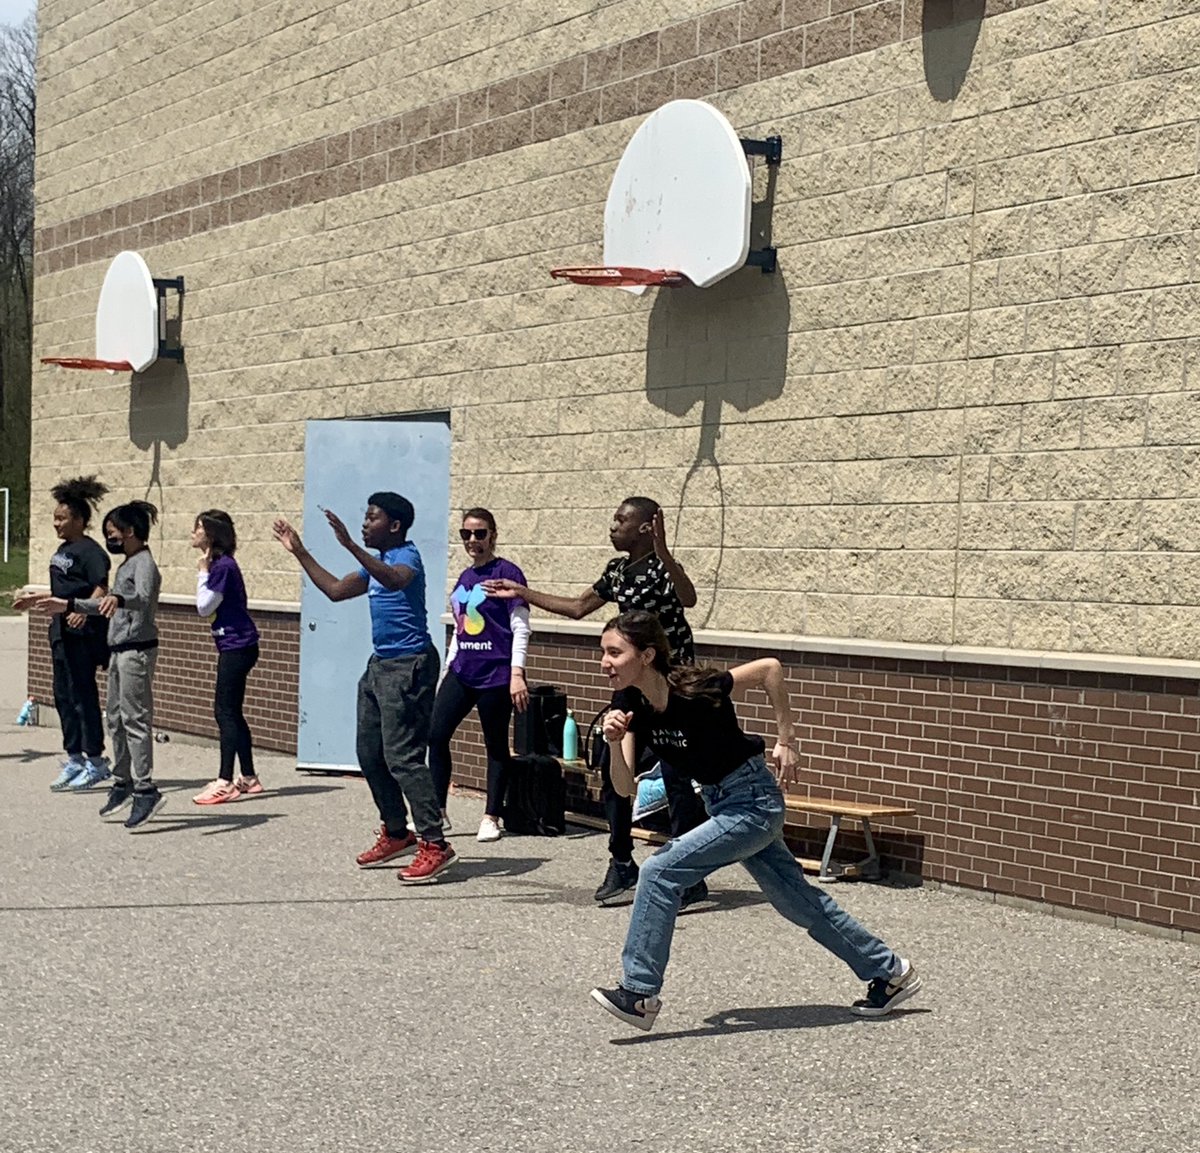 Our @AnthonyBrampton students had tons of fun exercising and learning through @XMovement_ lead physical and emotional development activities #PhoenixProud #MentalHealthAwareness #BuildingtheFutureTogether #MartinsMinions #FunInTheSun